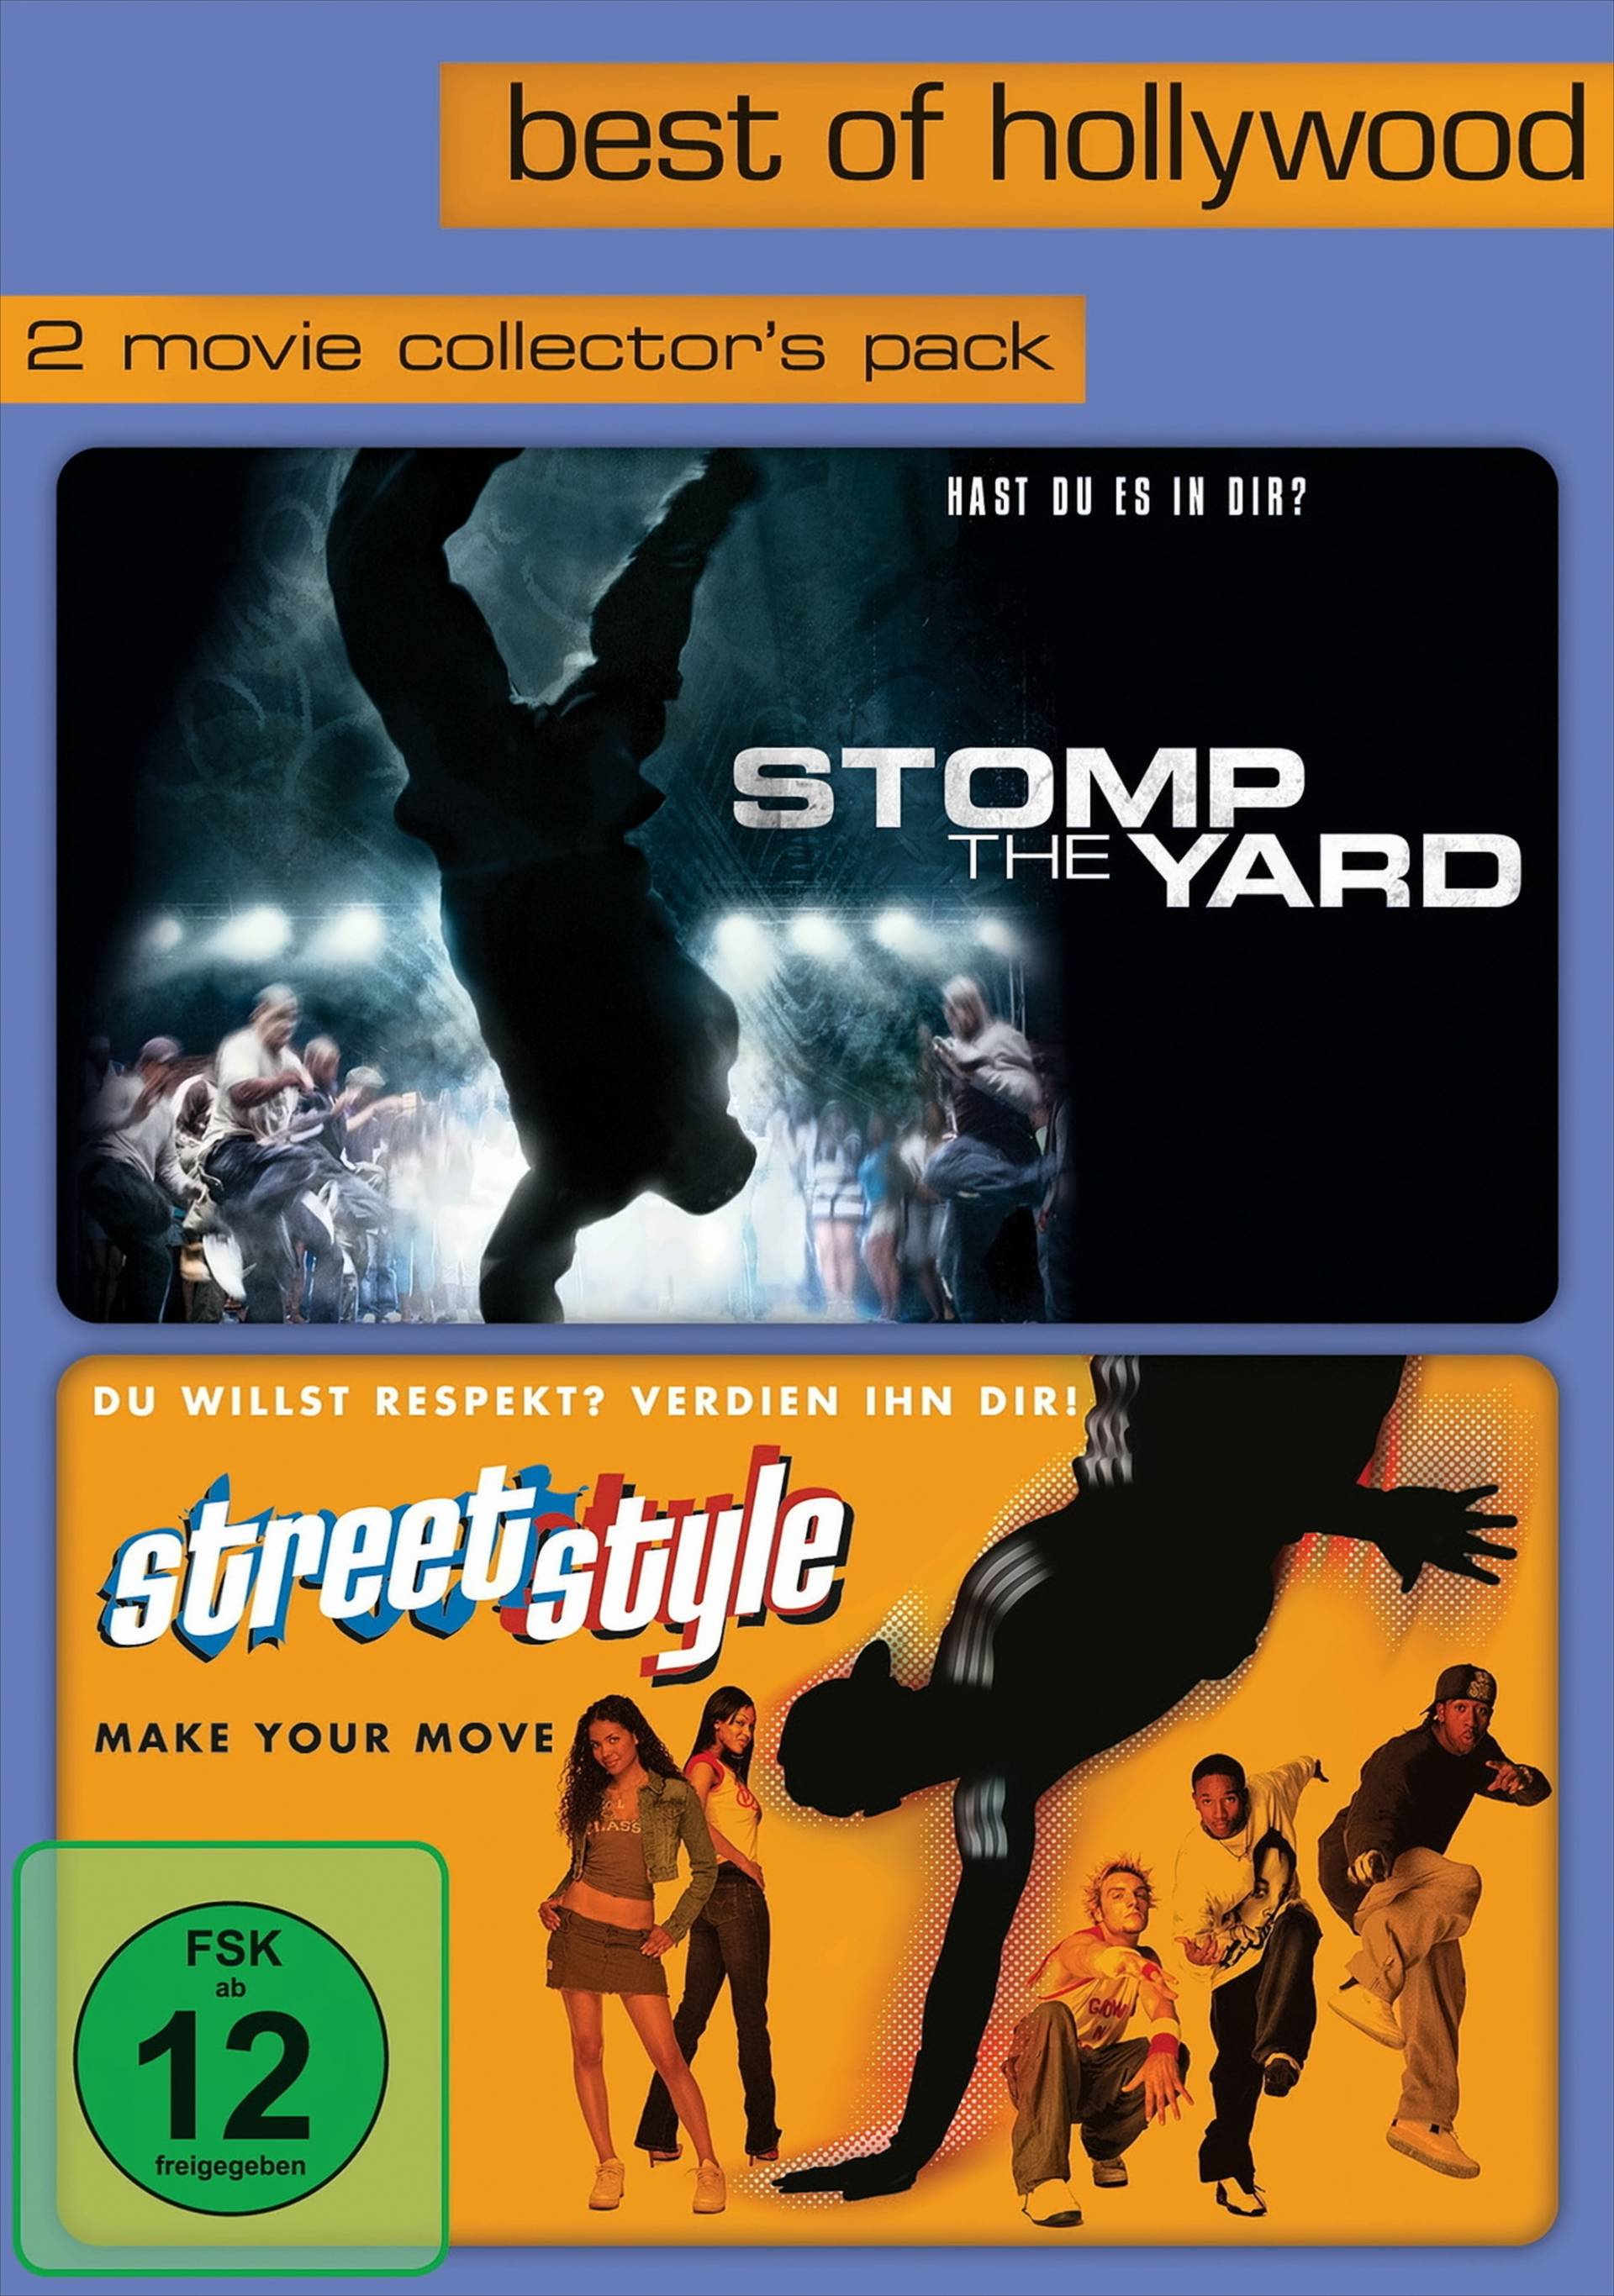 Best of Hollywood - 2 Movie Collector's Pack: Stomp The Yard / Street Style (2 DVDs) von Sony Pictures